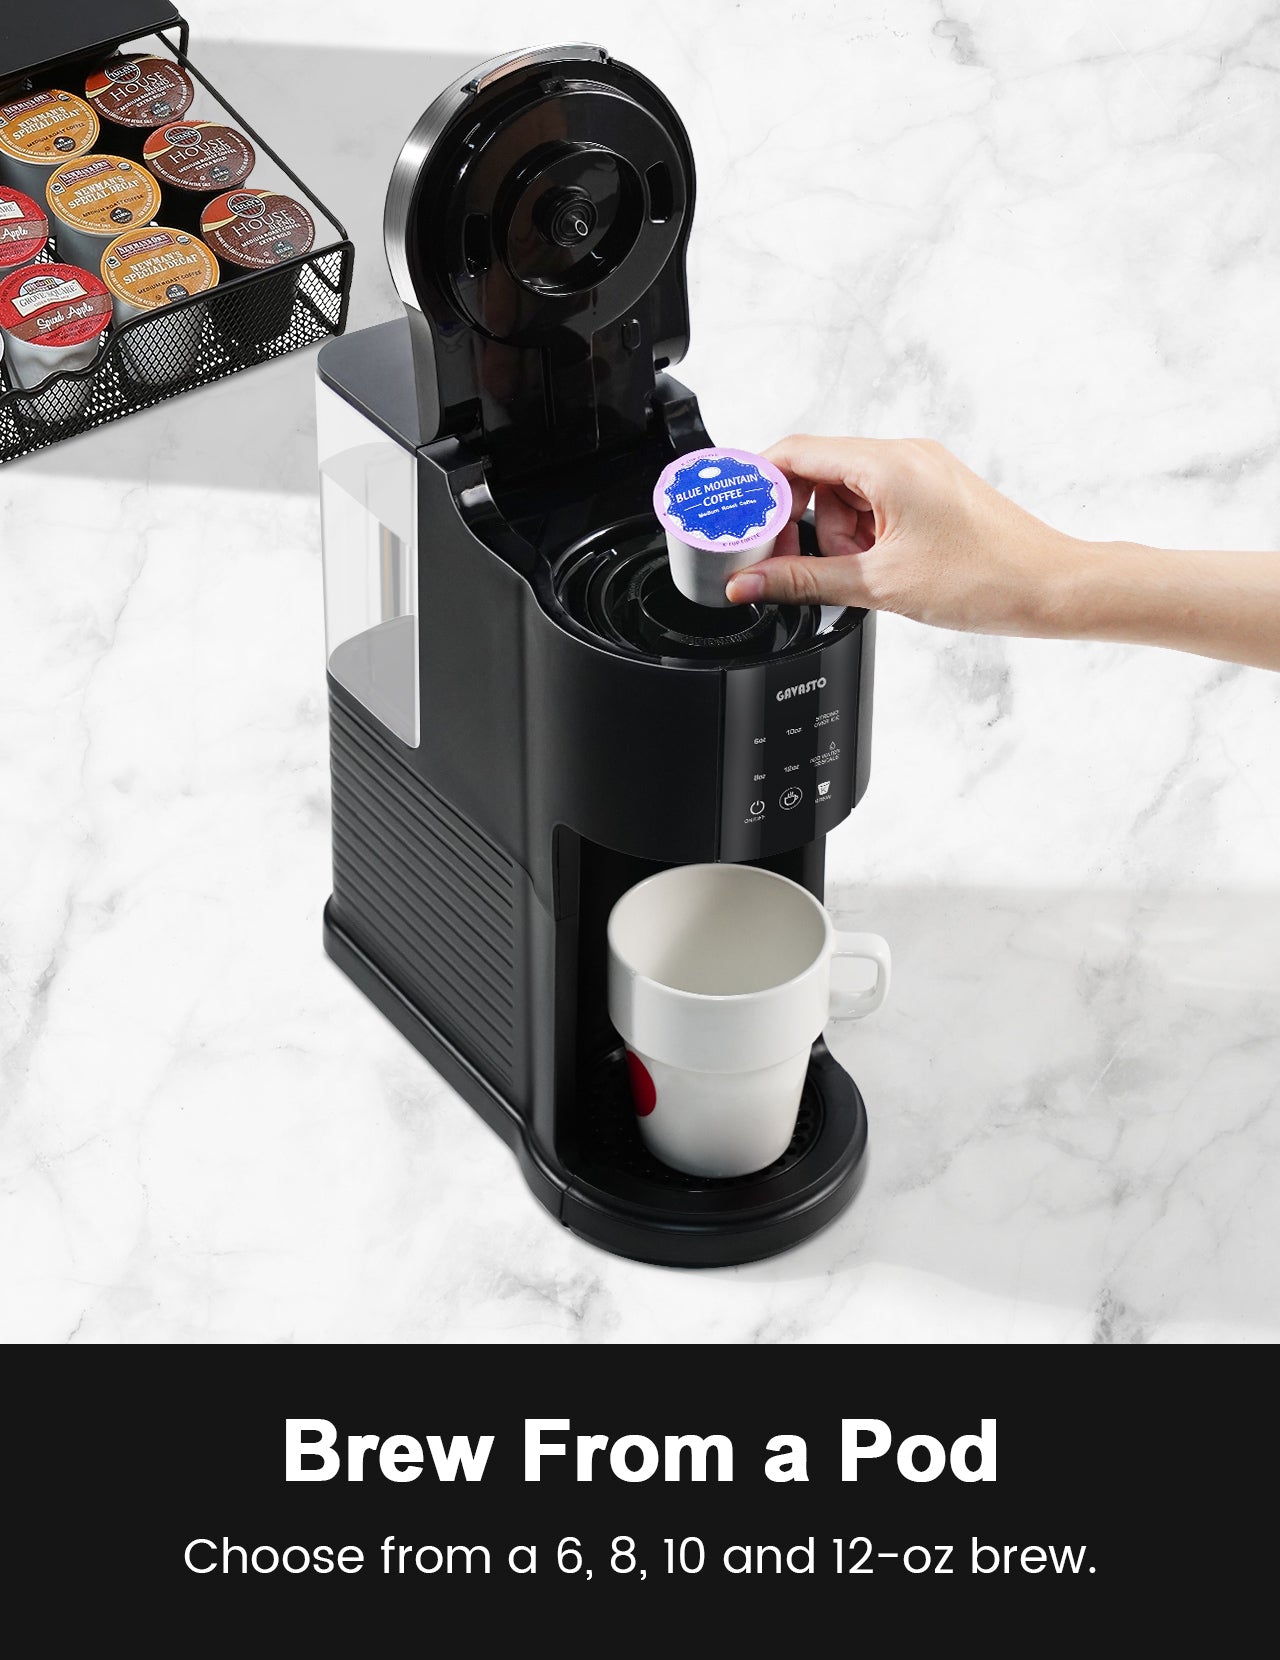 GAVASTO Pods & Grounds Single-Serve Coffee Maker, K-Cup Pod Compatible, Hot and Iced Coffee Maker with 40-oz. Reservoir, 6 to 12 oz. Cup Size, Descaling Reminder and Self Cleaning, Strong Brew Modes